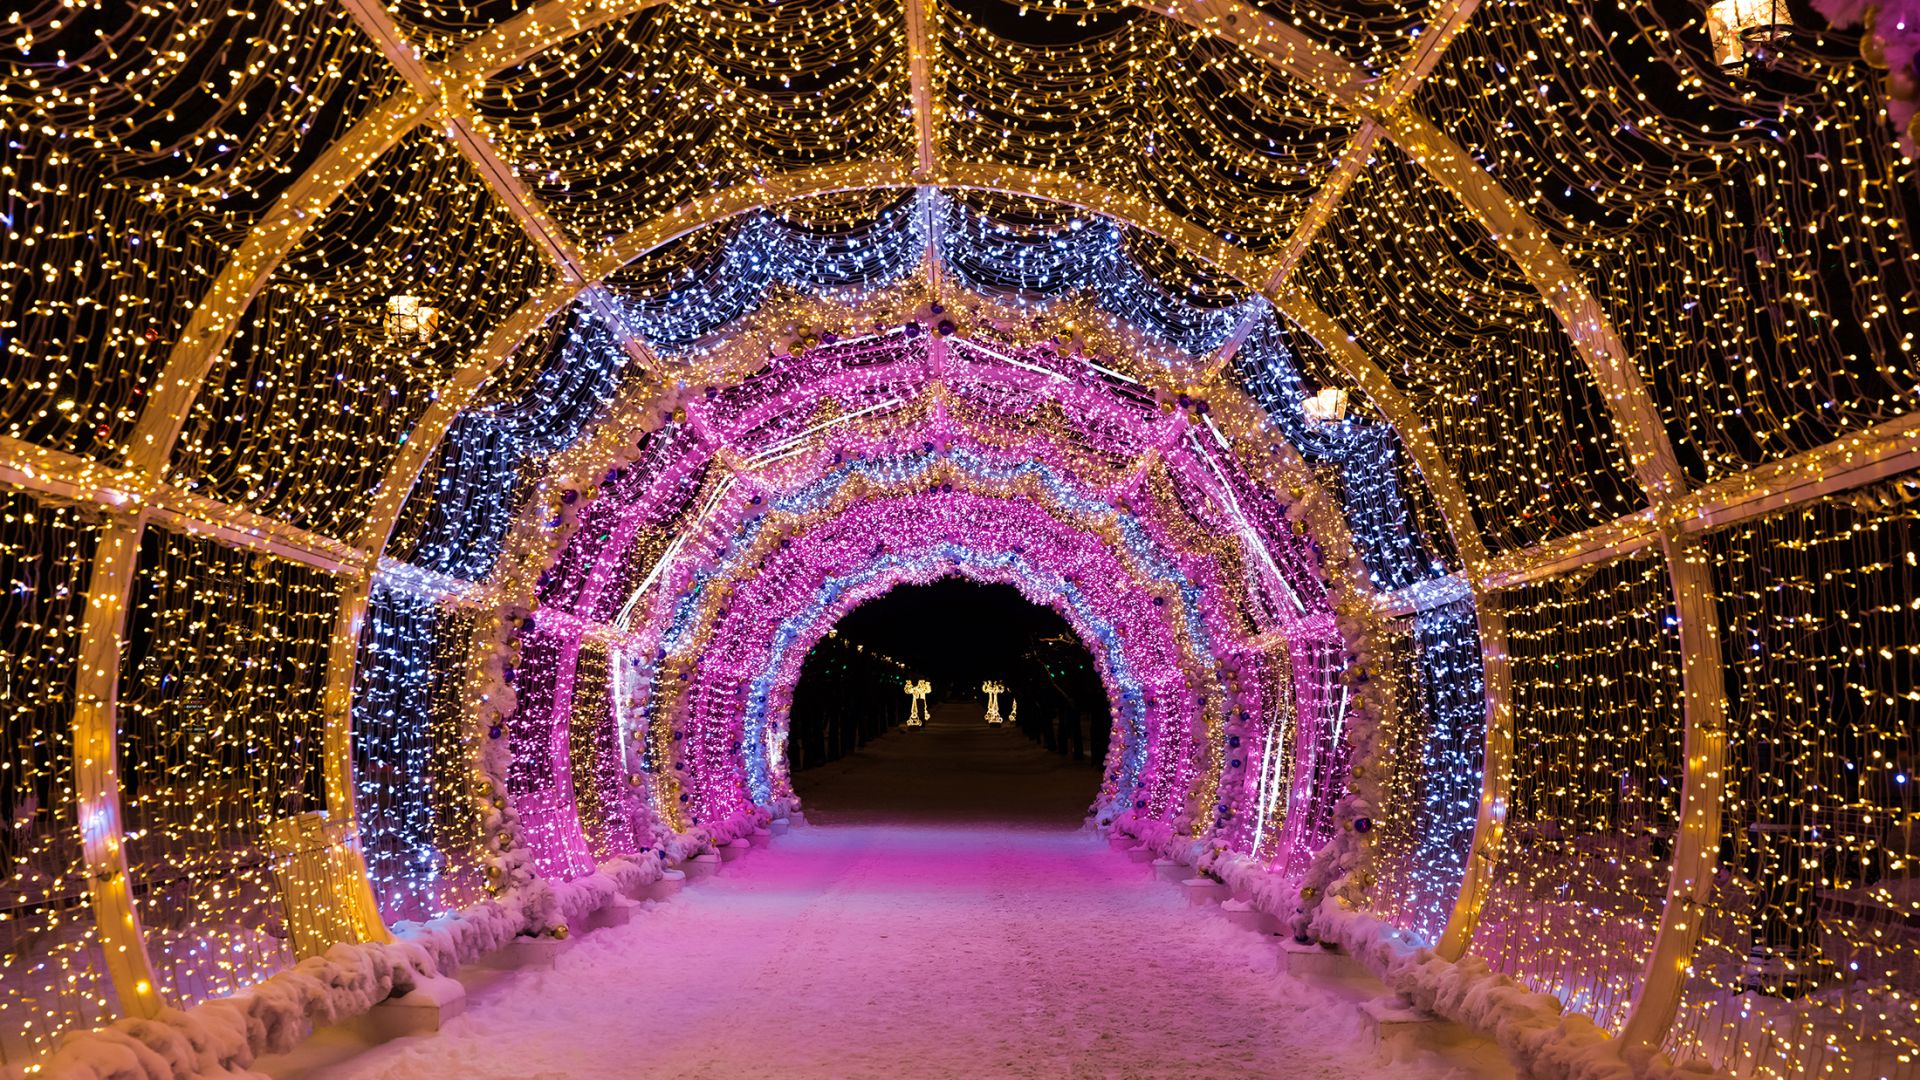 A Tunnel With Lights